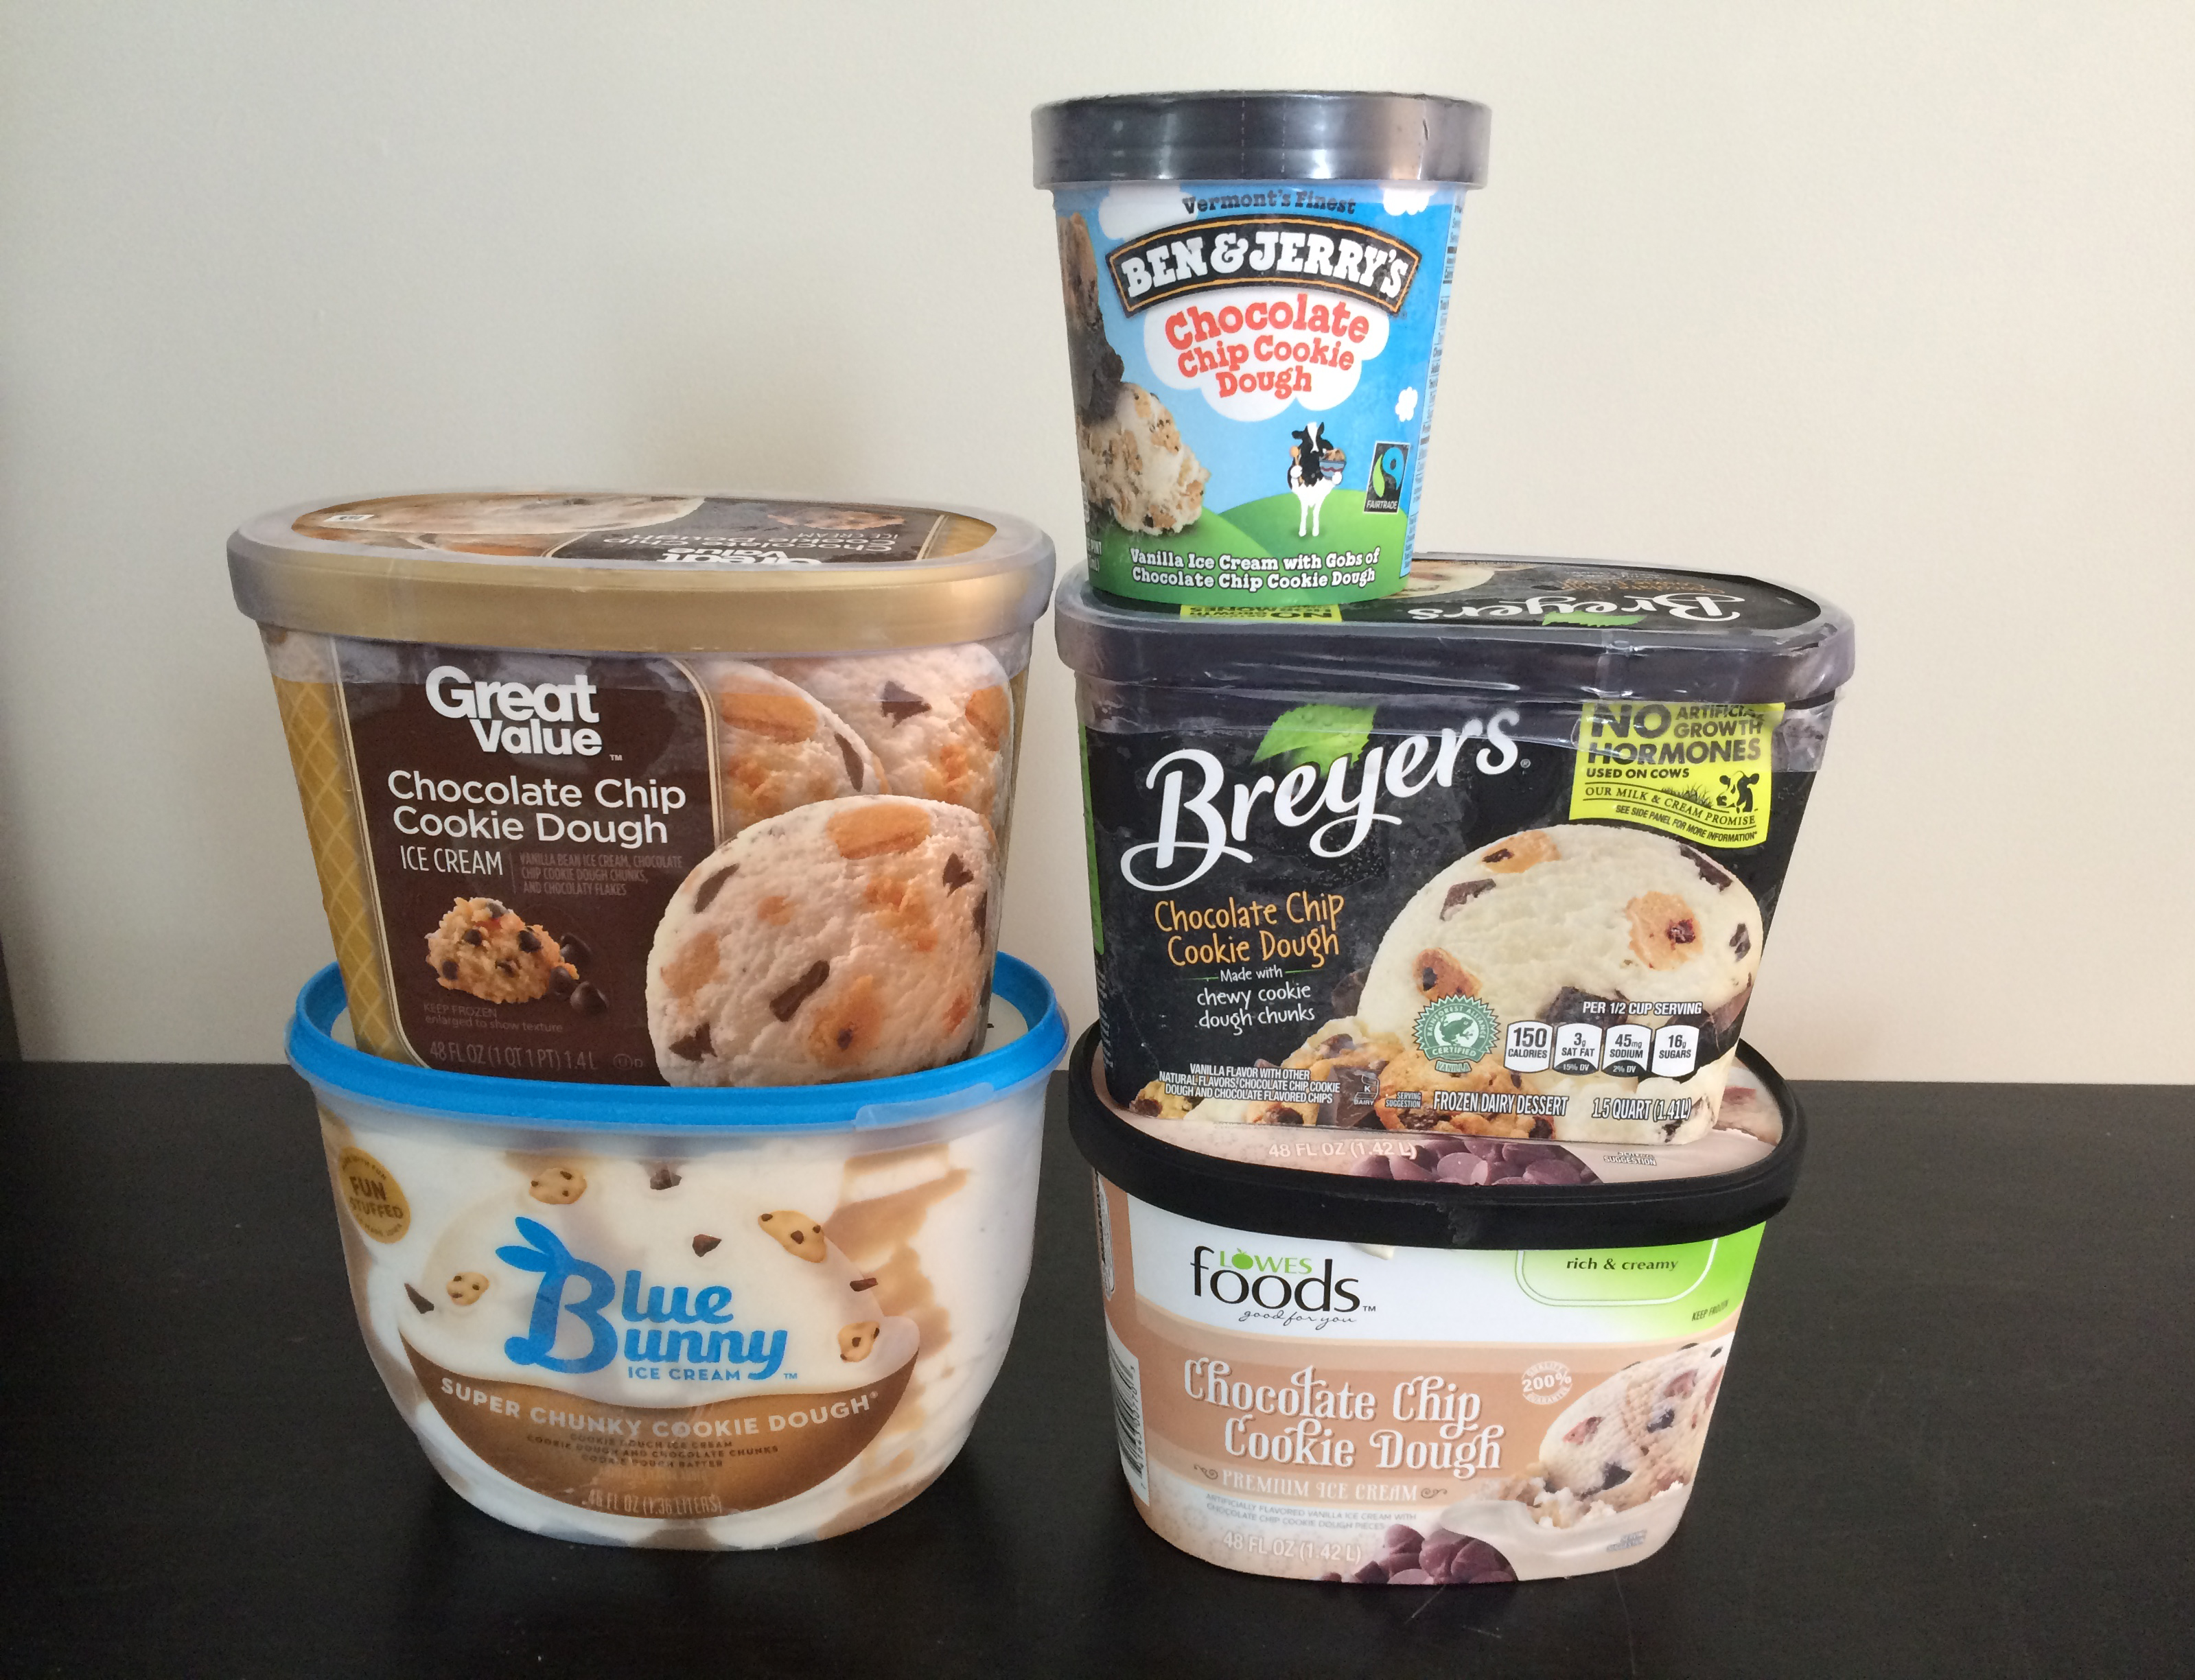 This is the lineup of different cookie dough ice creams I bought this morning.